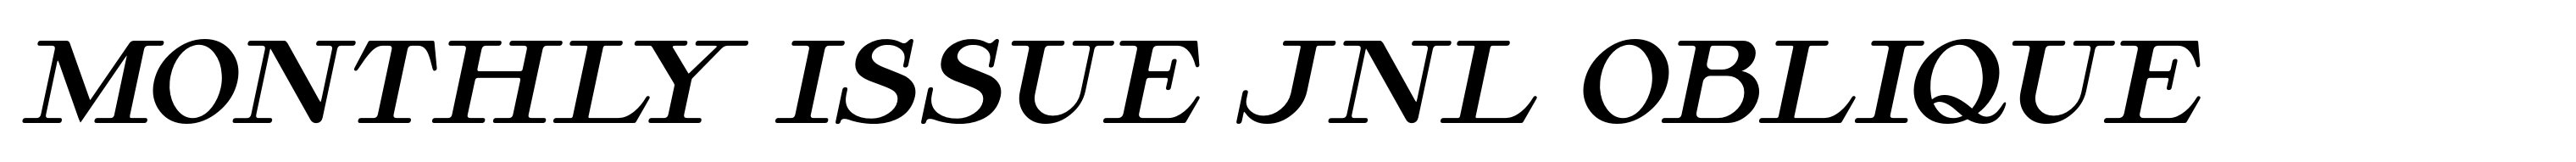 Monthly Issue JNL Oblique